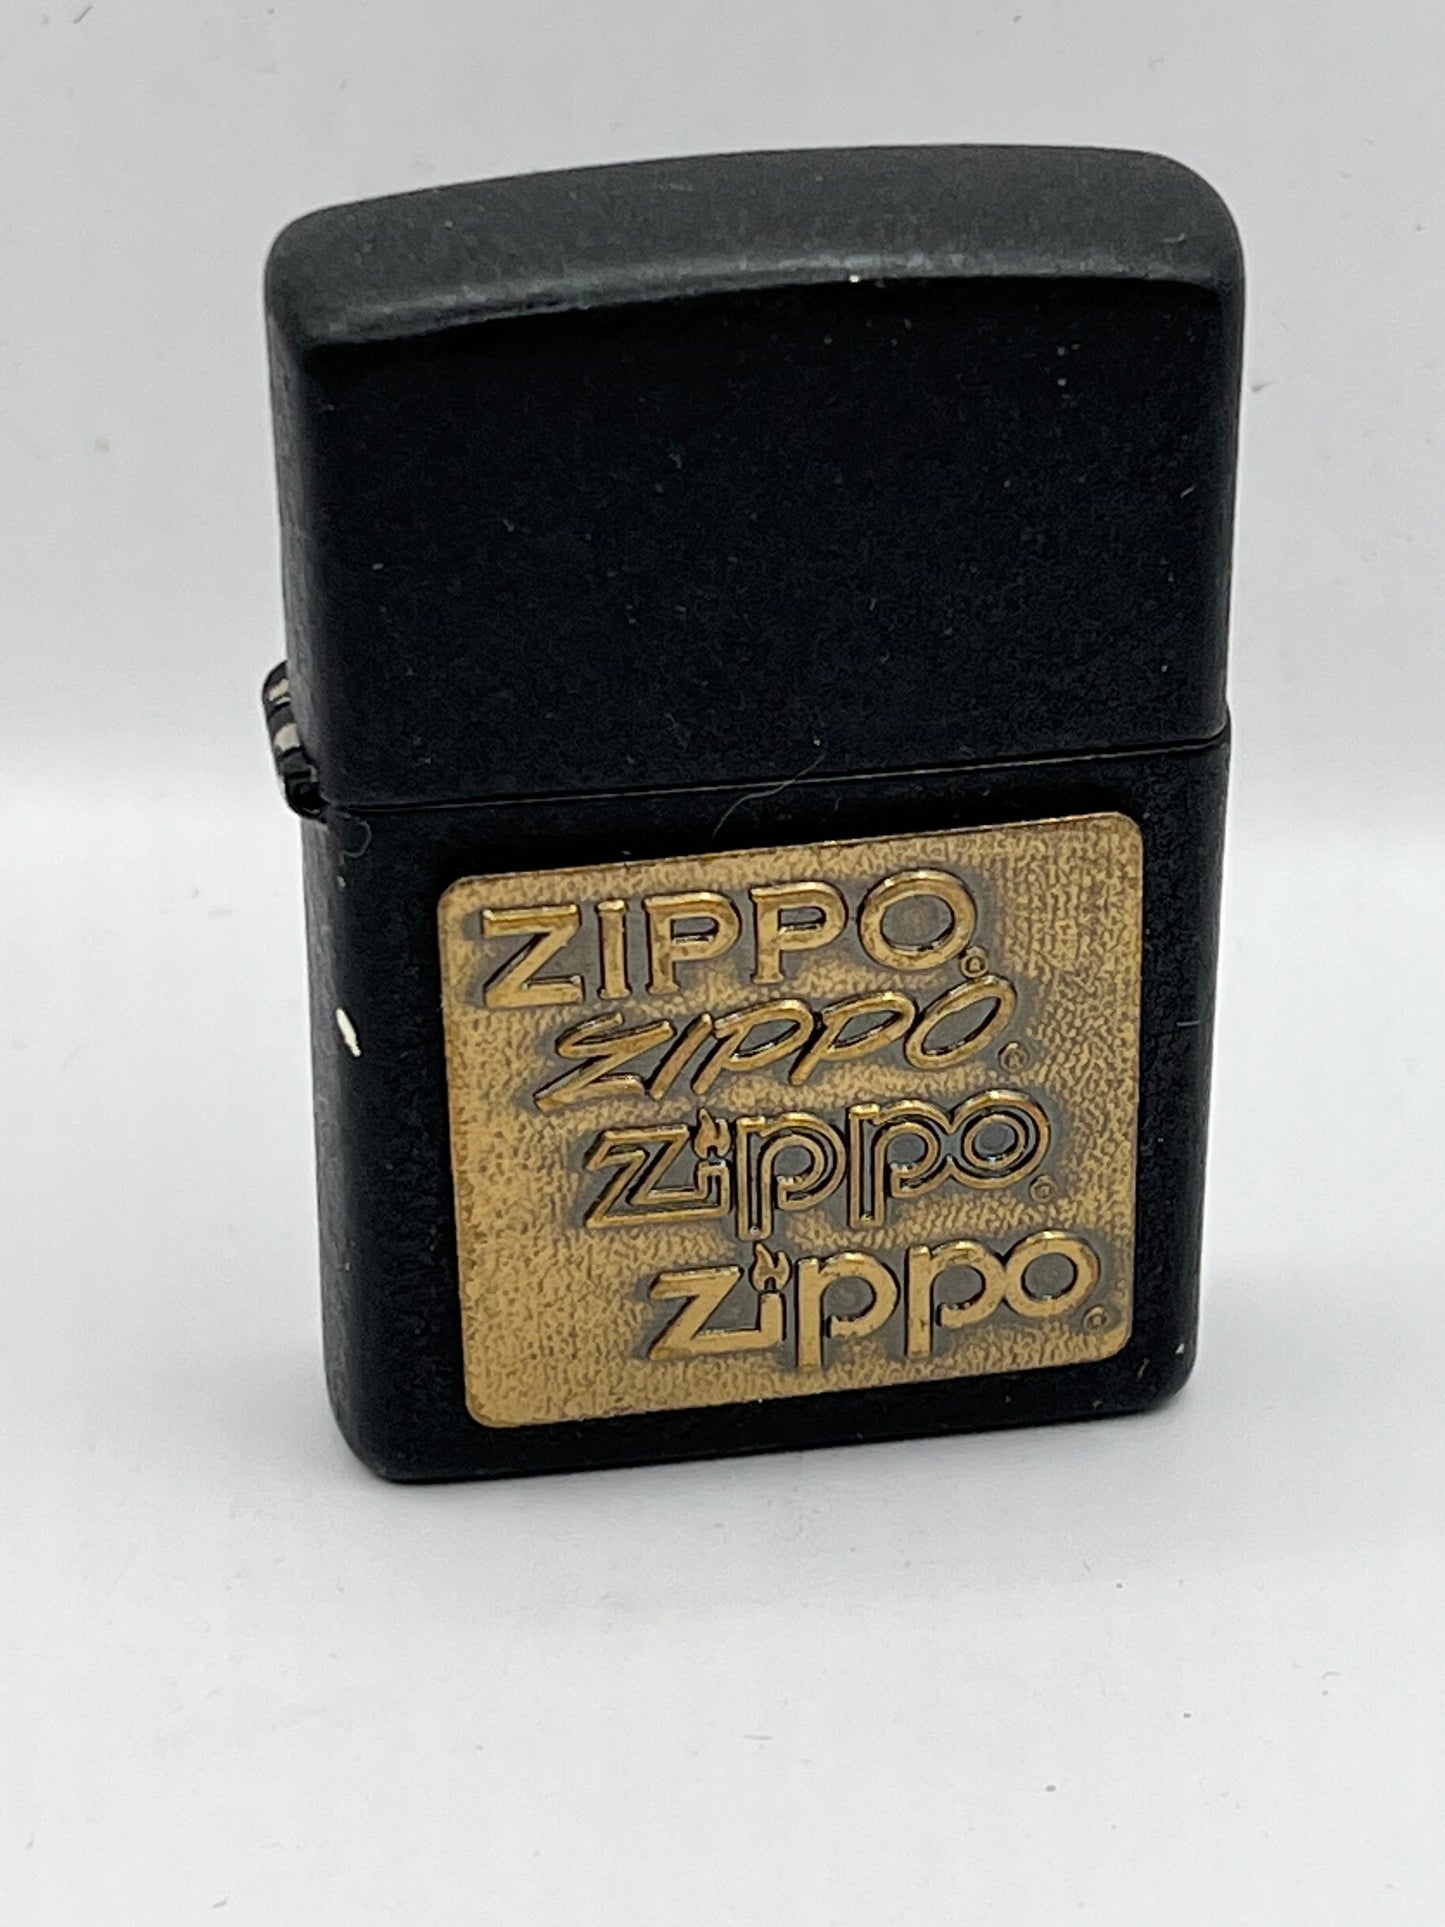 1999 Zippo logos #362 Zippo Brass Emblem on Black Crackle Bradford stamped but with correct year Niagara Falls stamped insert unfired.